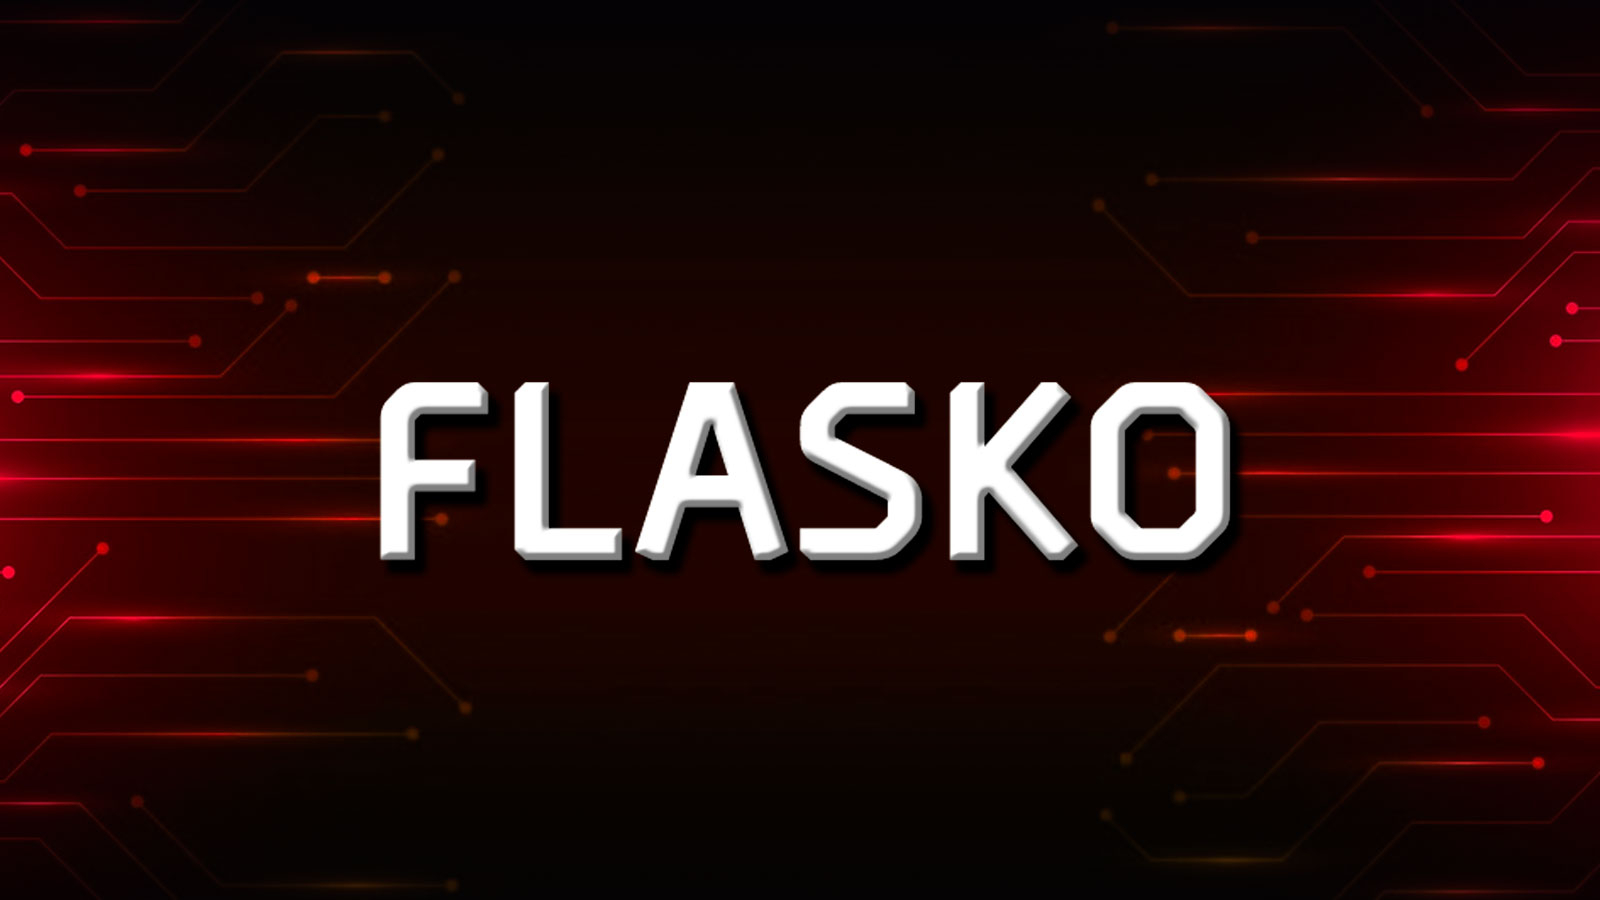 Flasko (FLSK) Launches Pre-Sale in Q4, 2022, Targets Filecoin (FIL), Axie Infinity (AXS) Investors